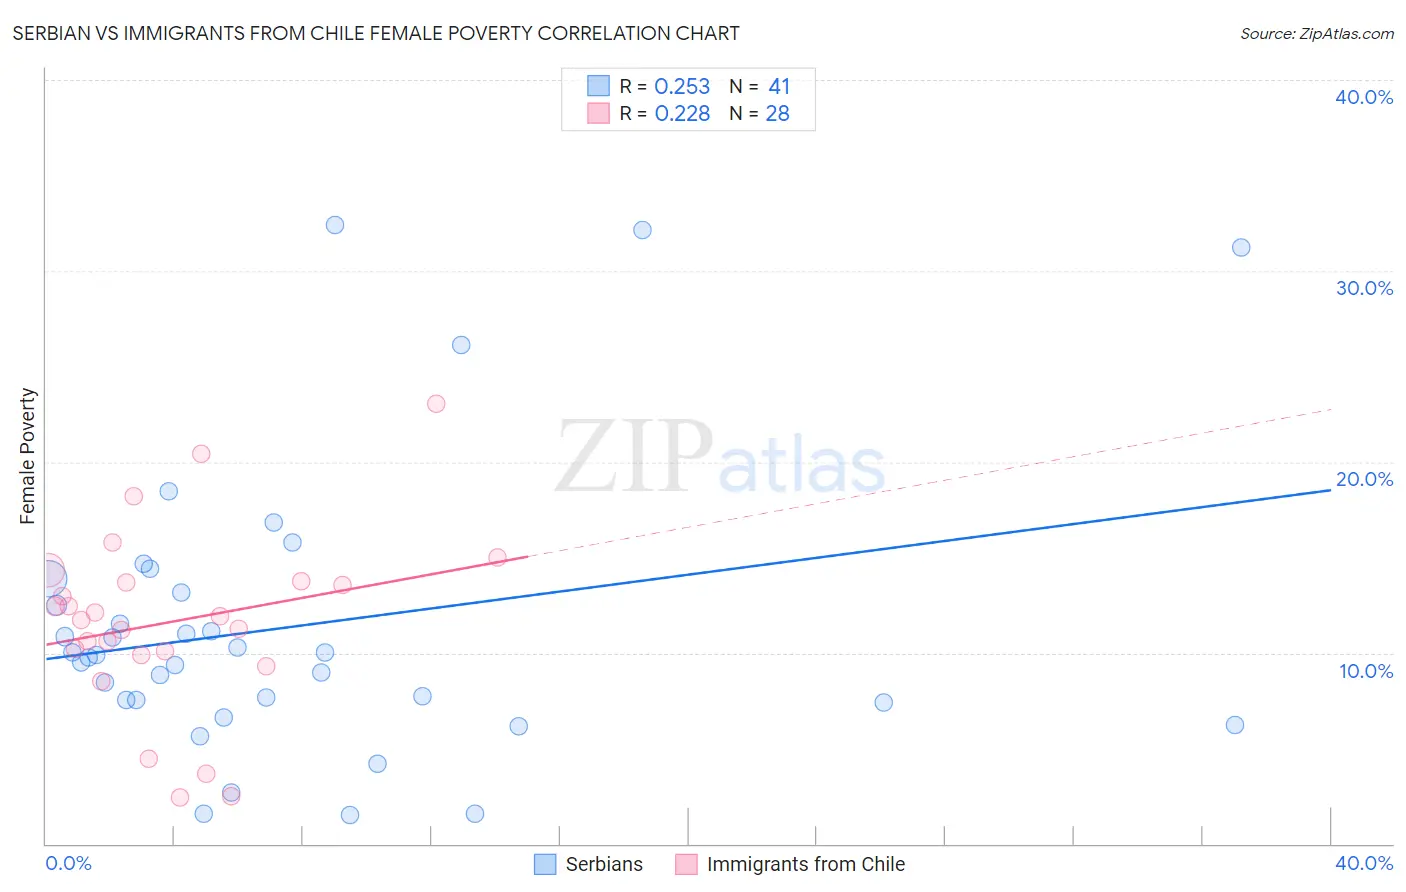 Serbian vs Immigrants from Chile Female Poverty